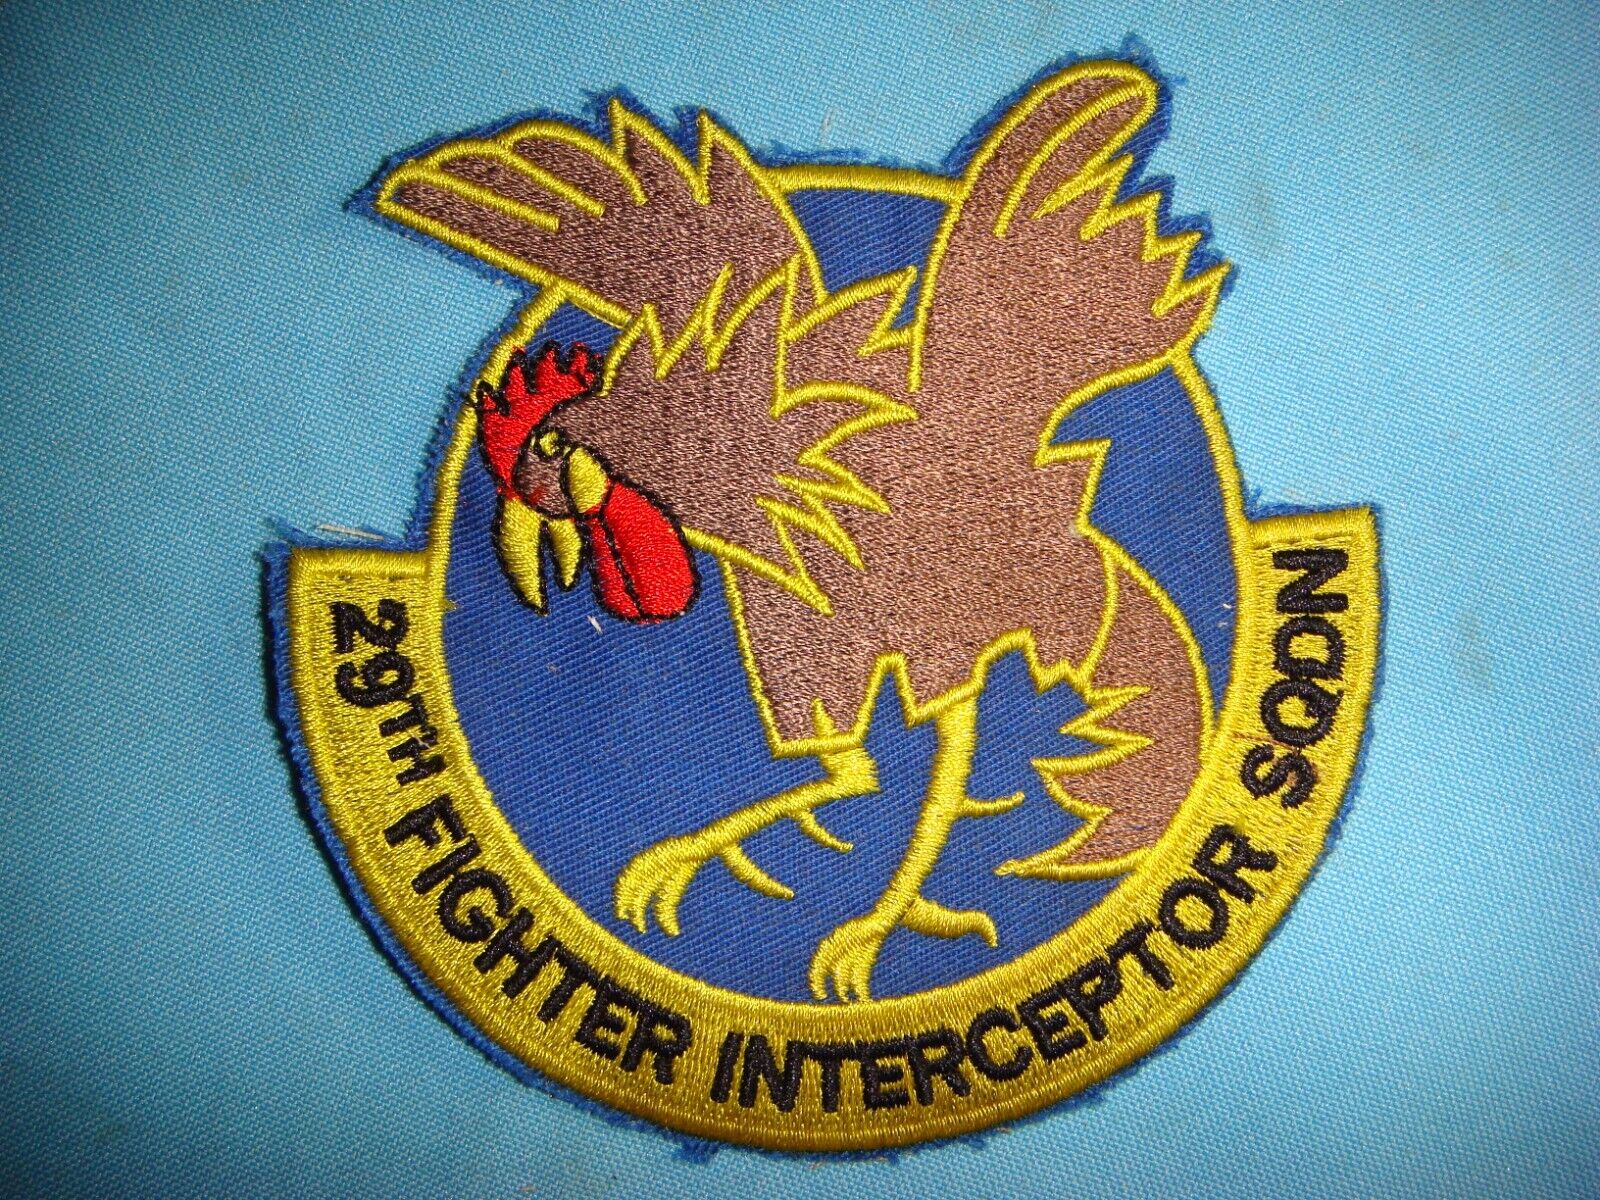  PATCH USAF 29th FIGHTER INTERCEPTOR SQUADRON